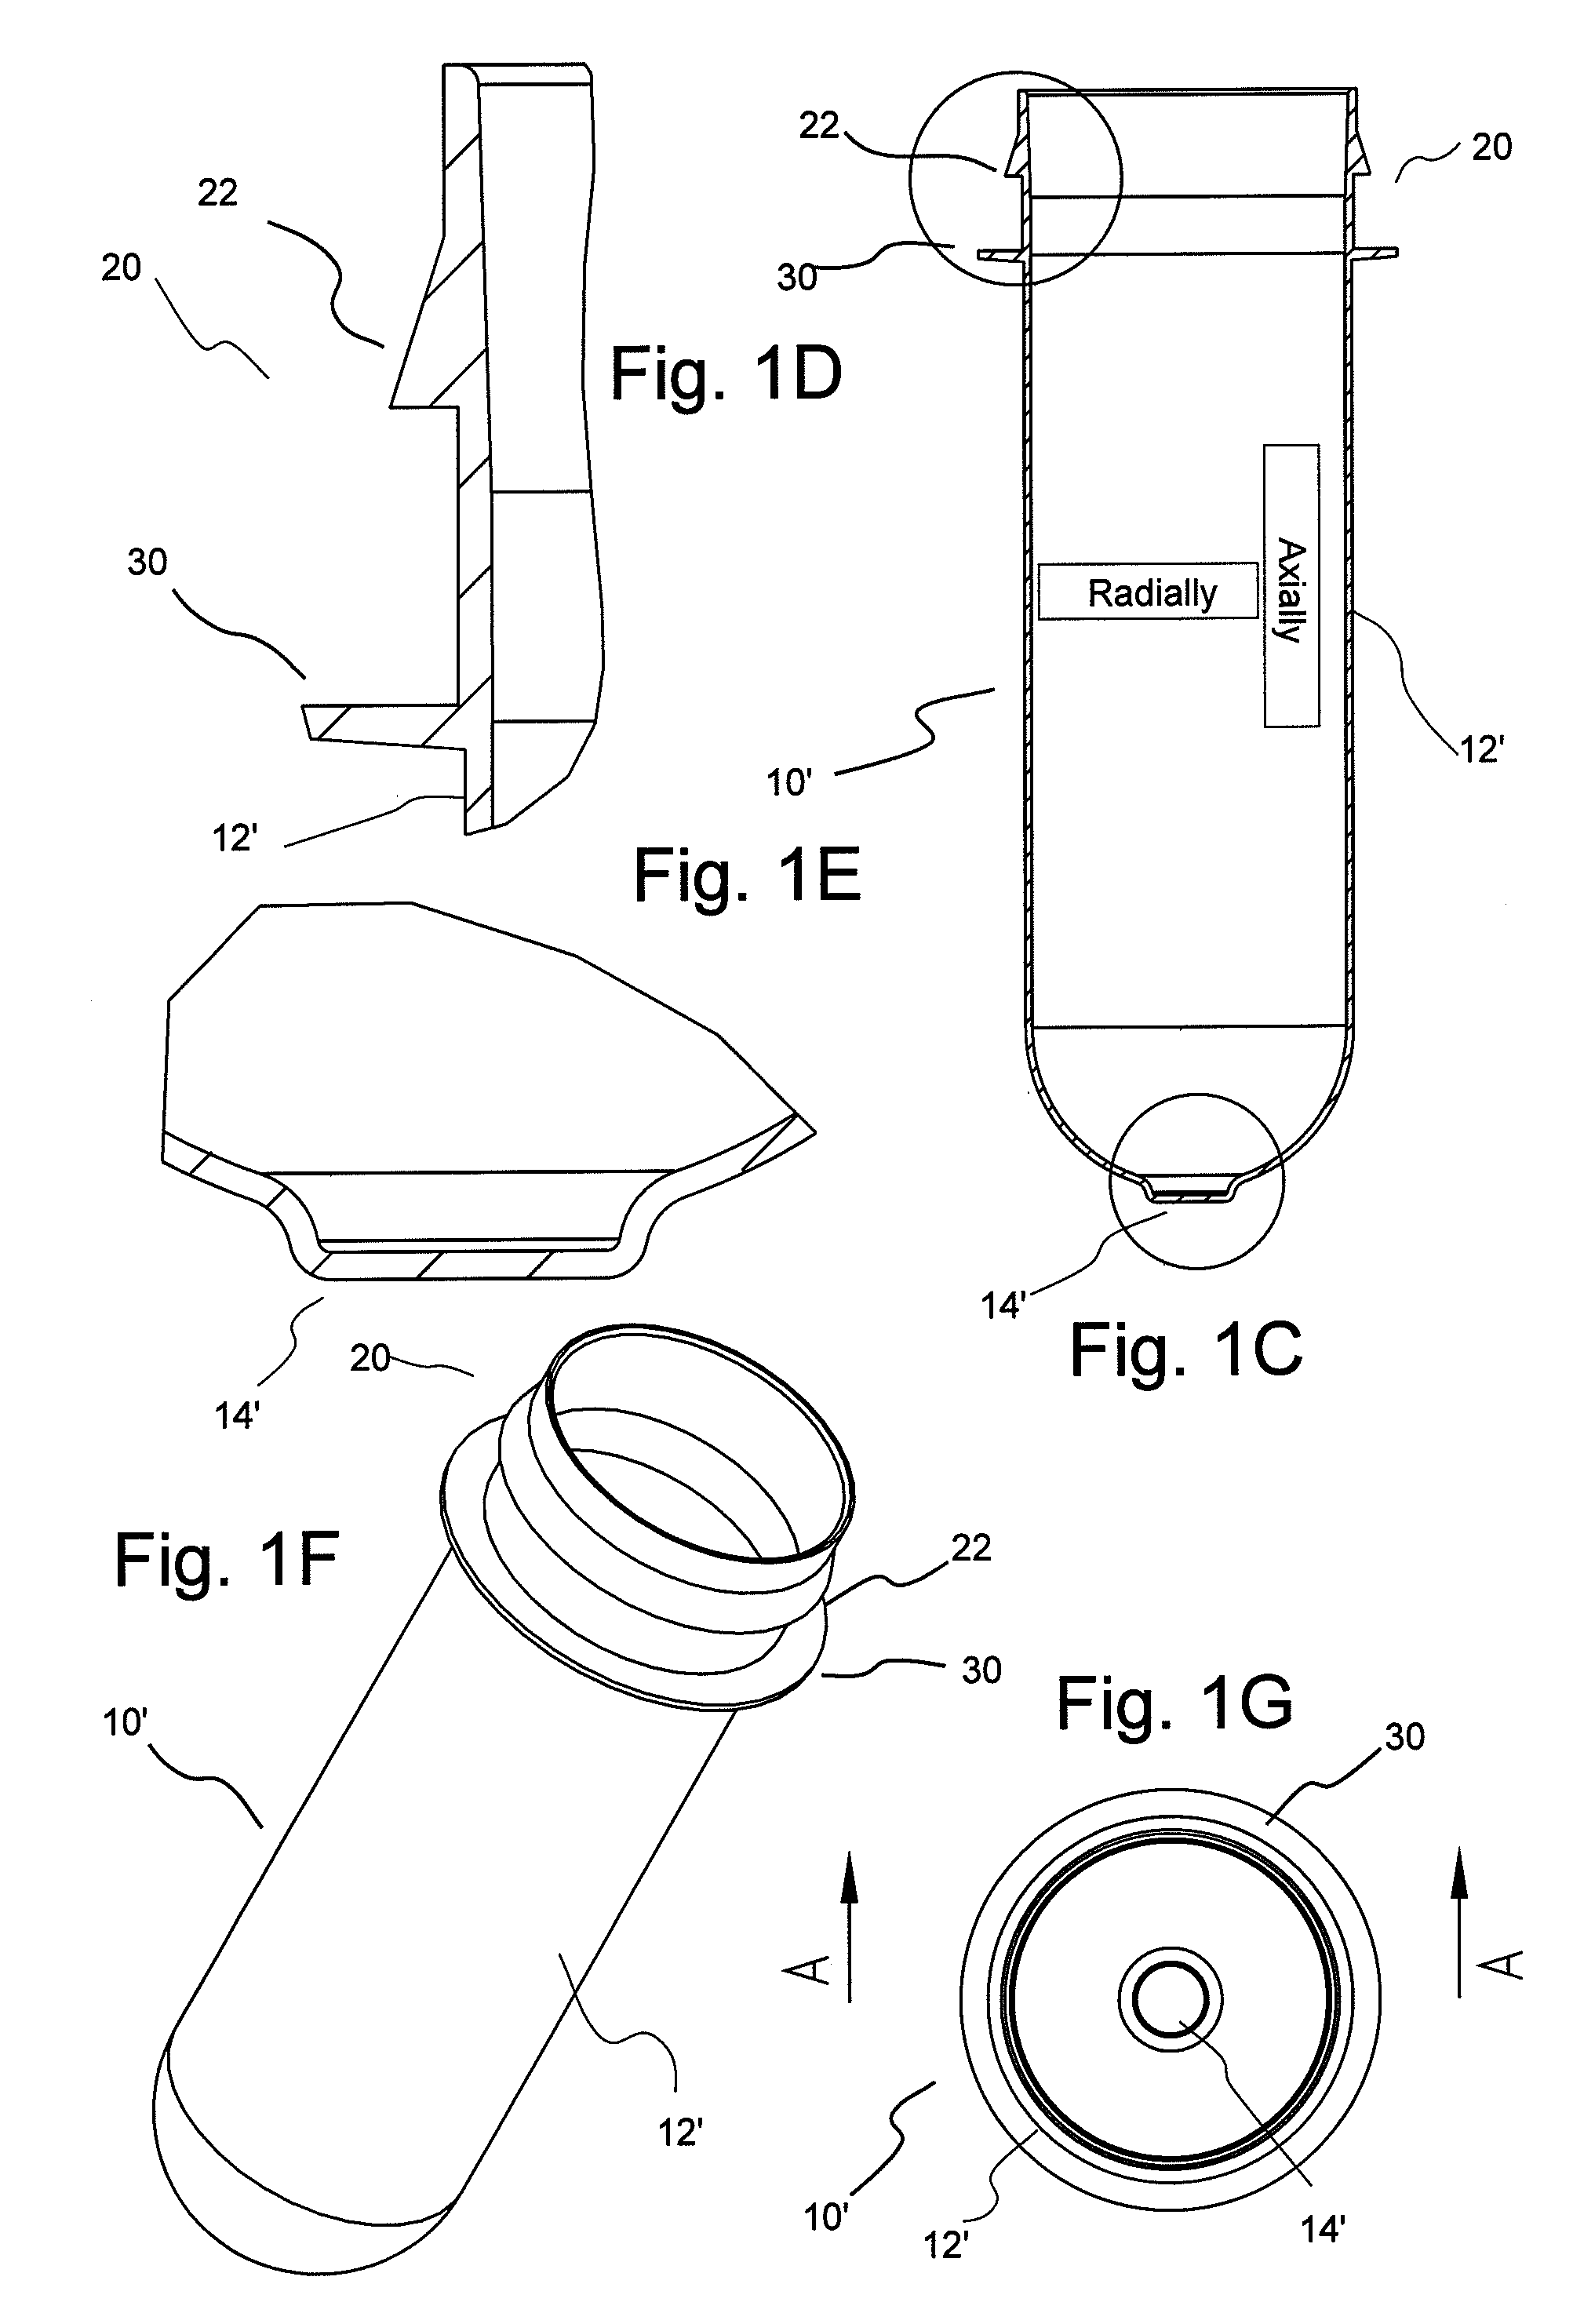 Syringe for use with injectors and methods of manufacturing syringes and other devices